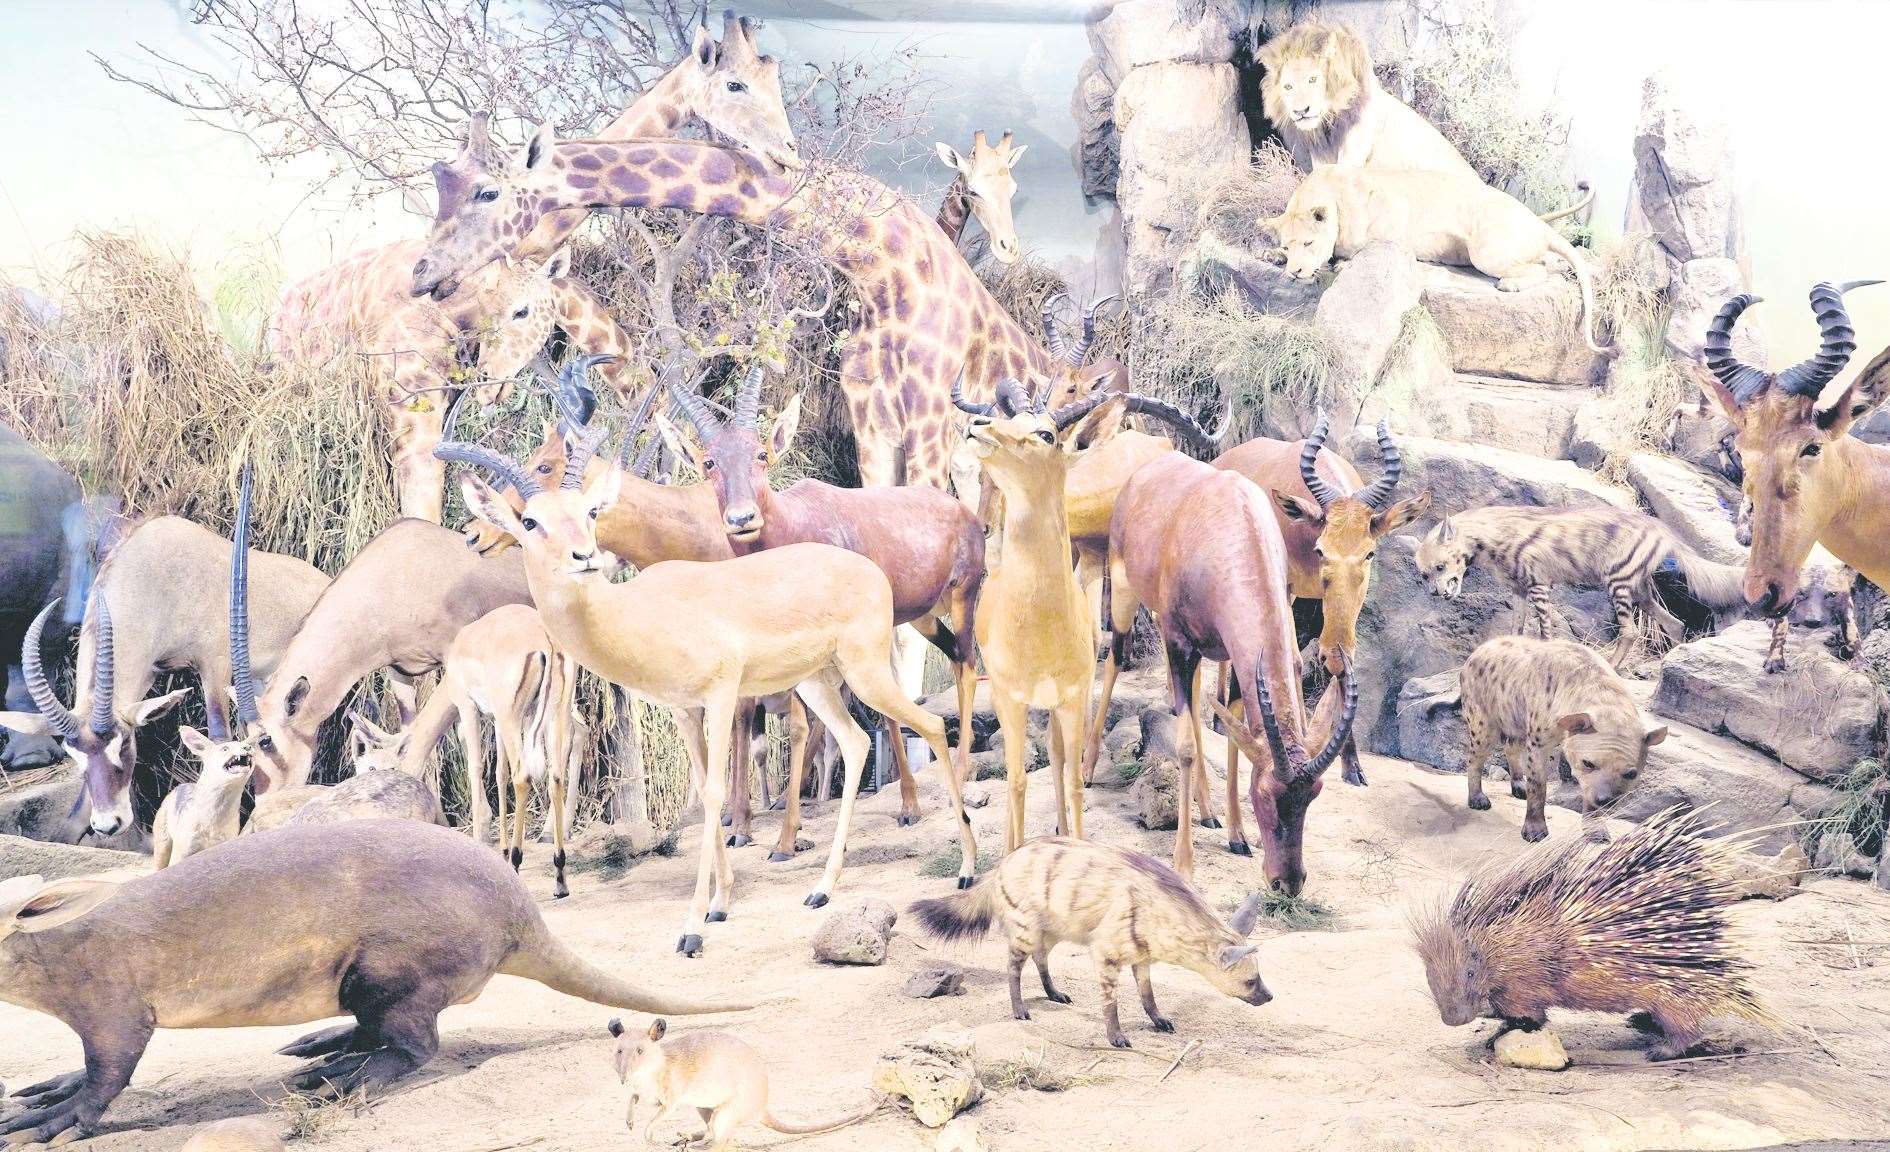 The Powell-Cotton Museum has housed some of the biggest dioramas in the world